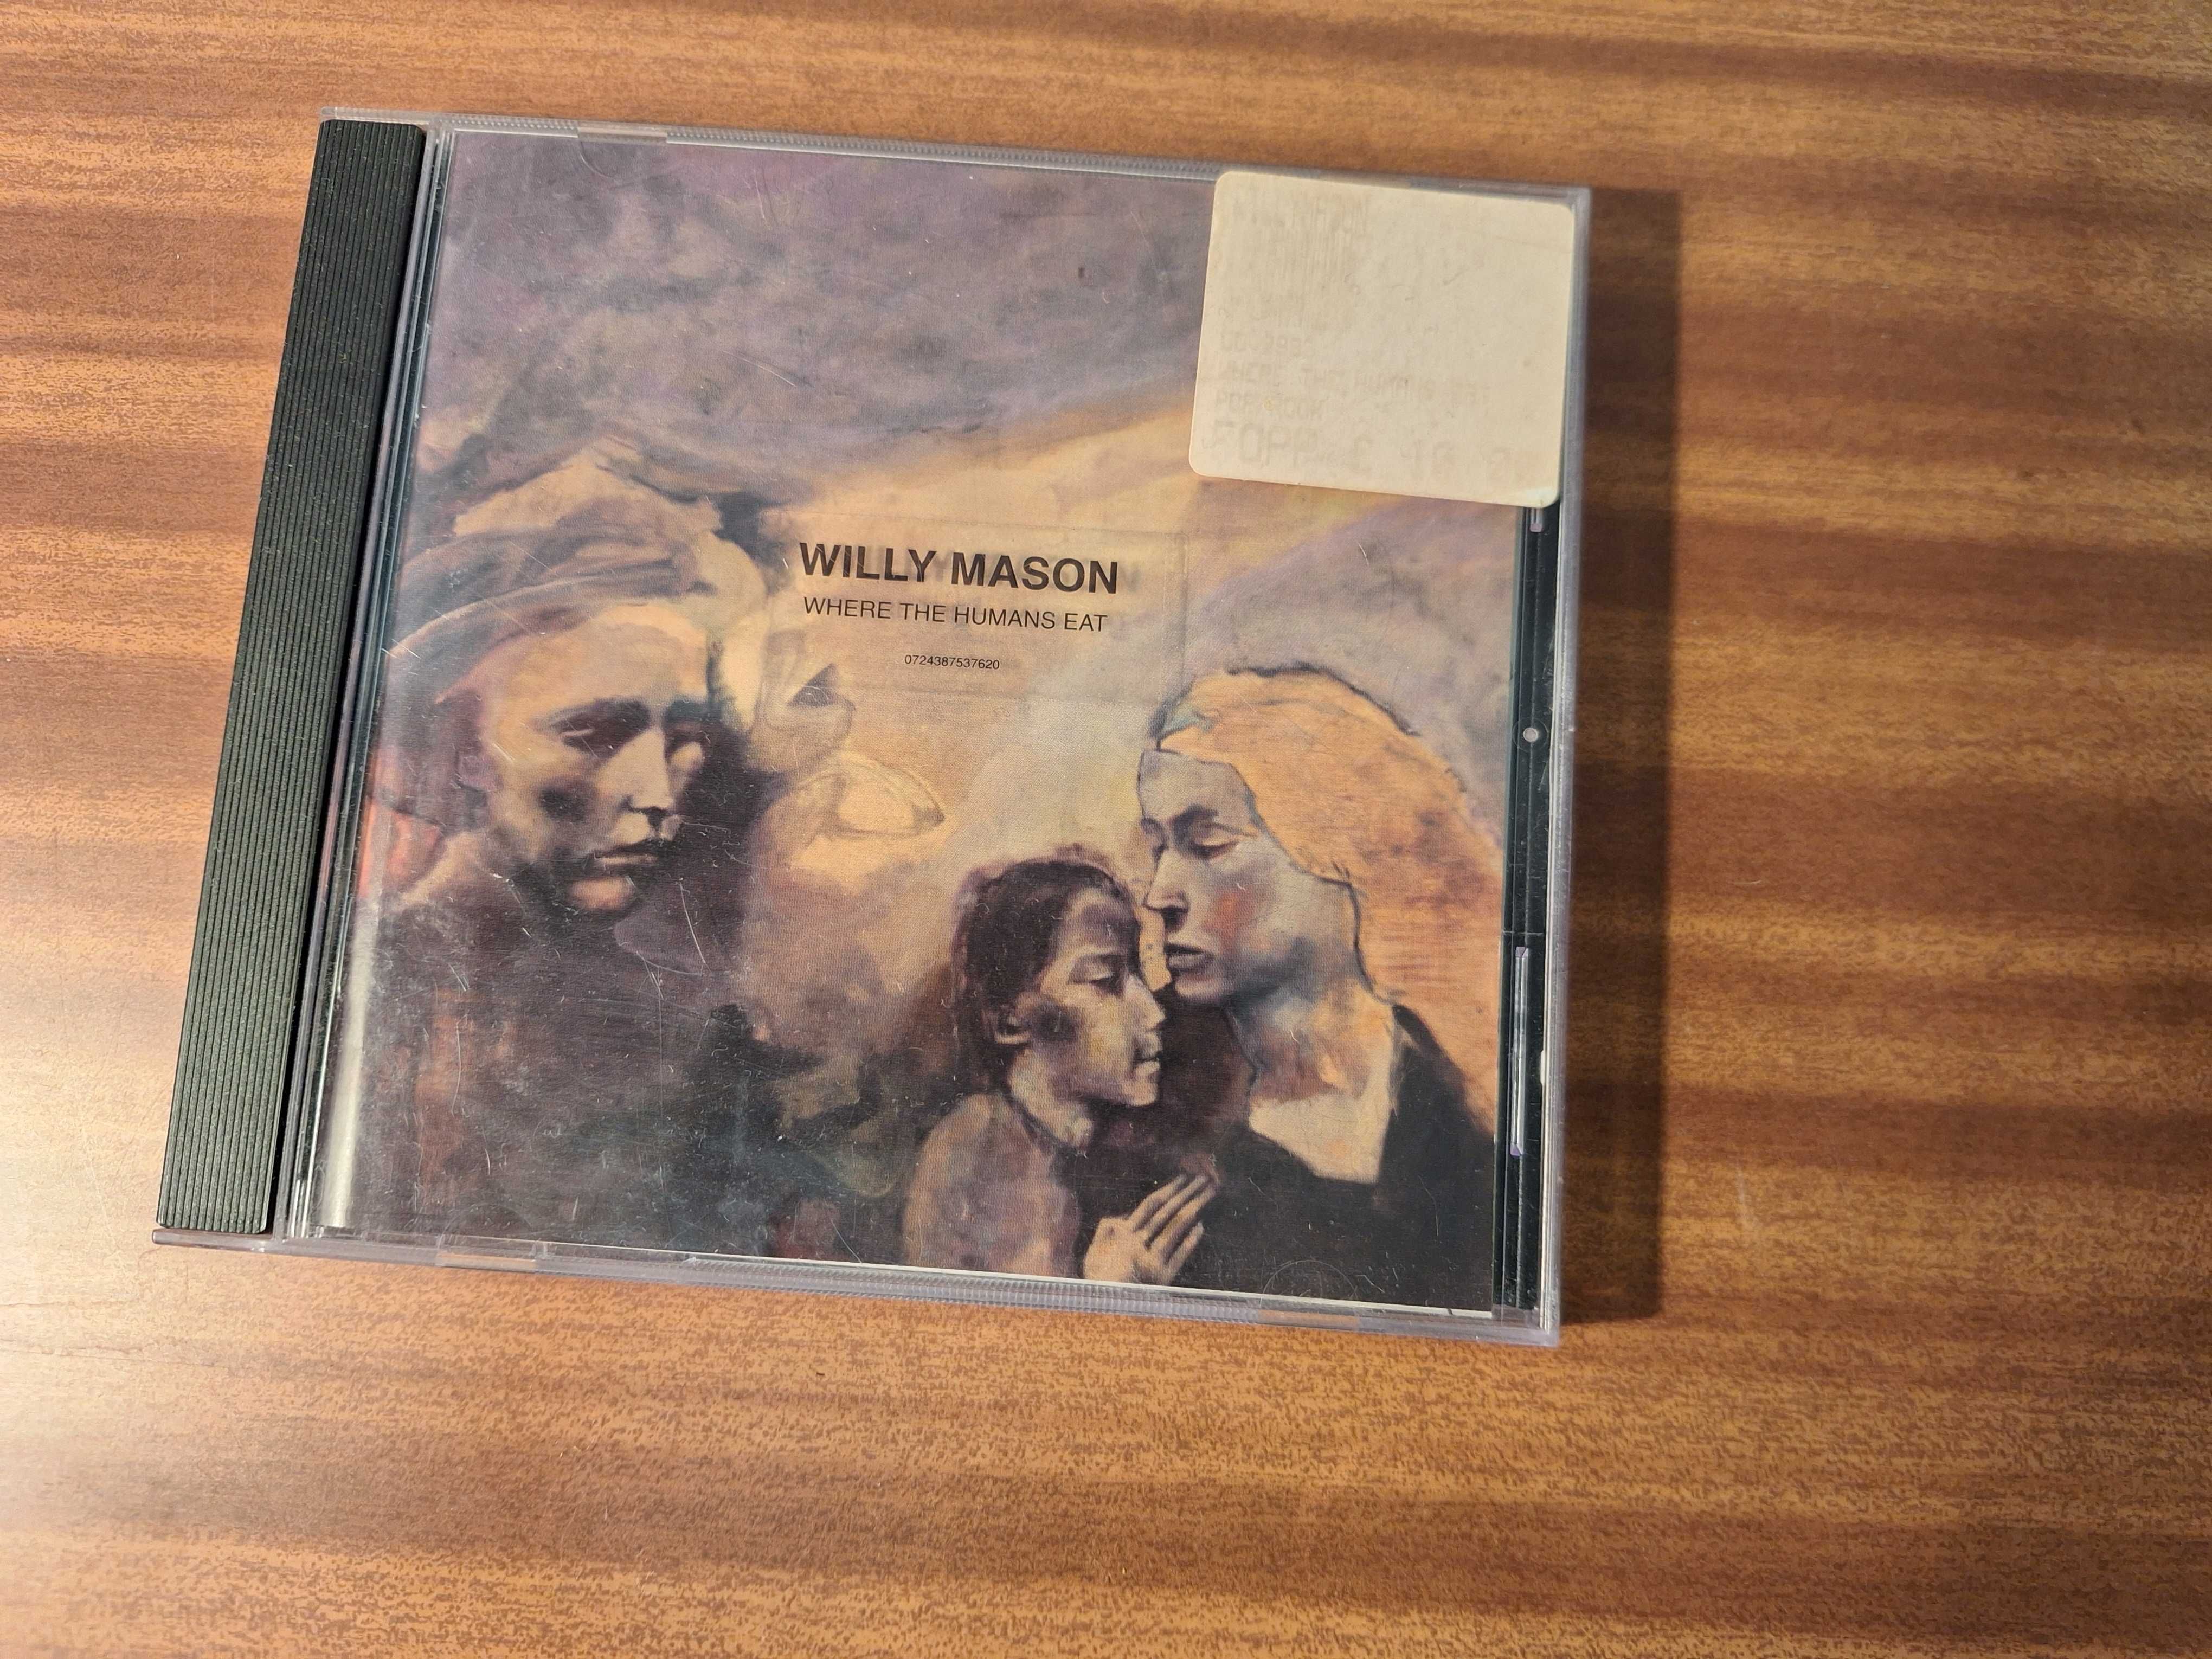 Willy Mason - Where The Humans Eat CD